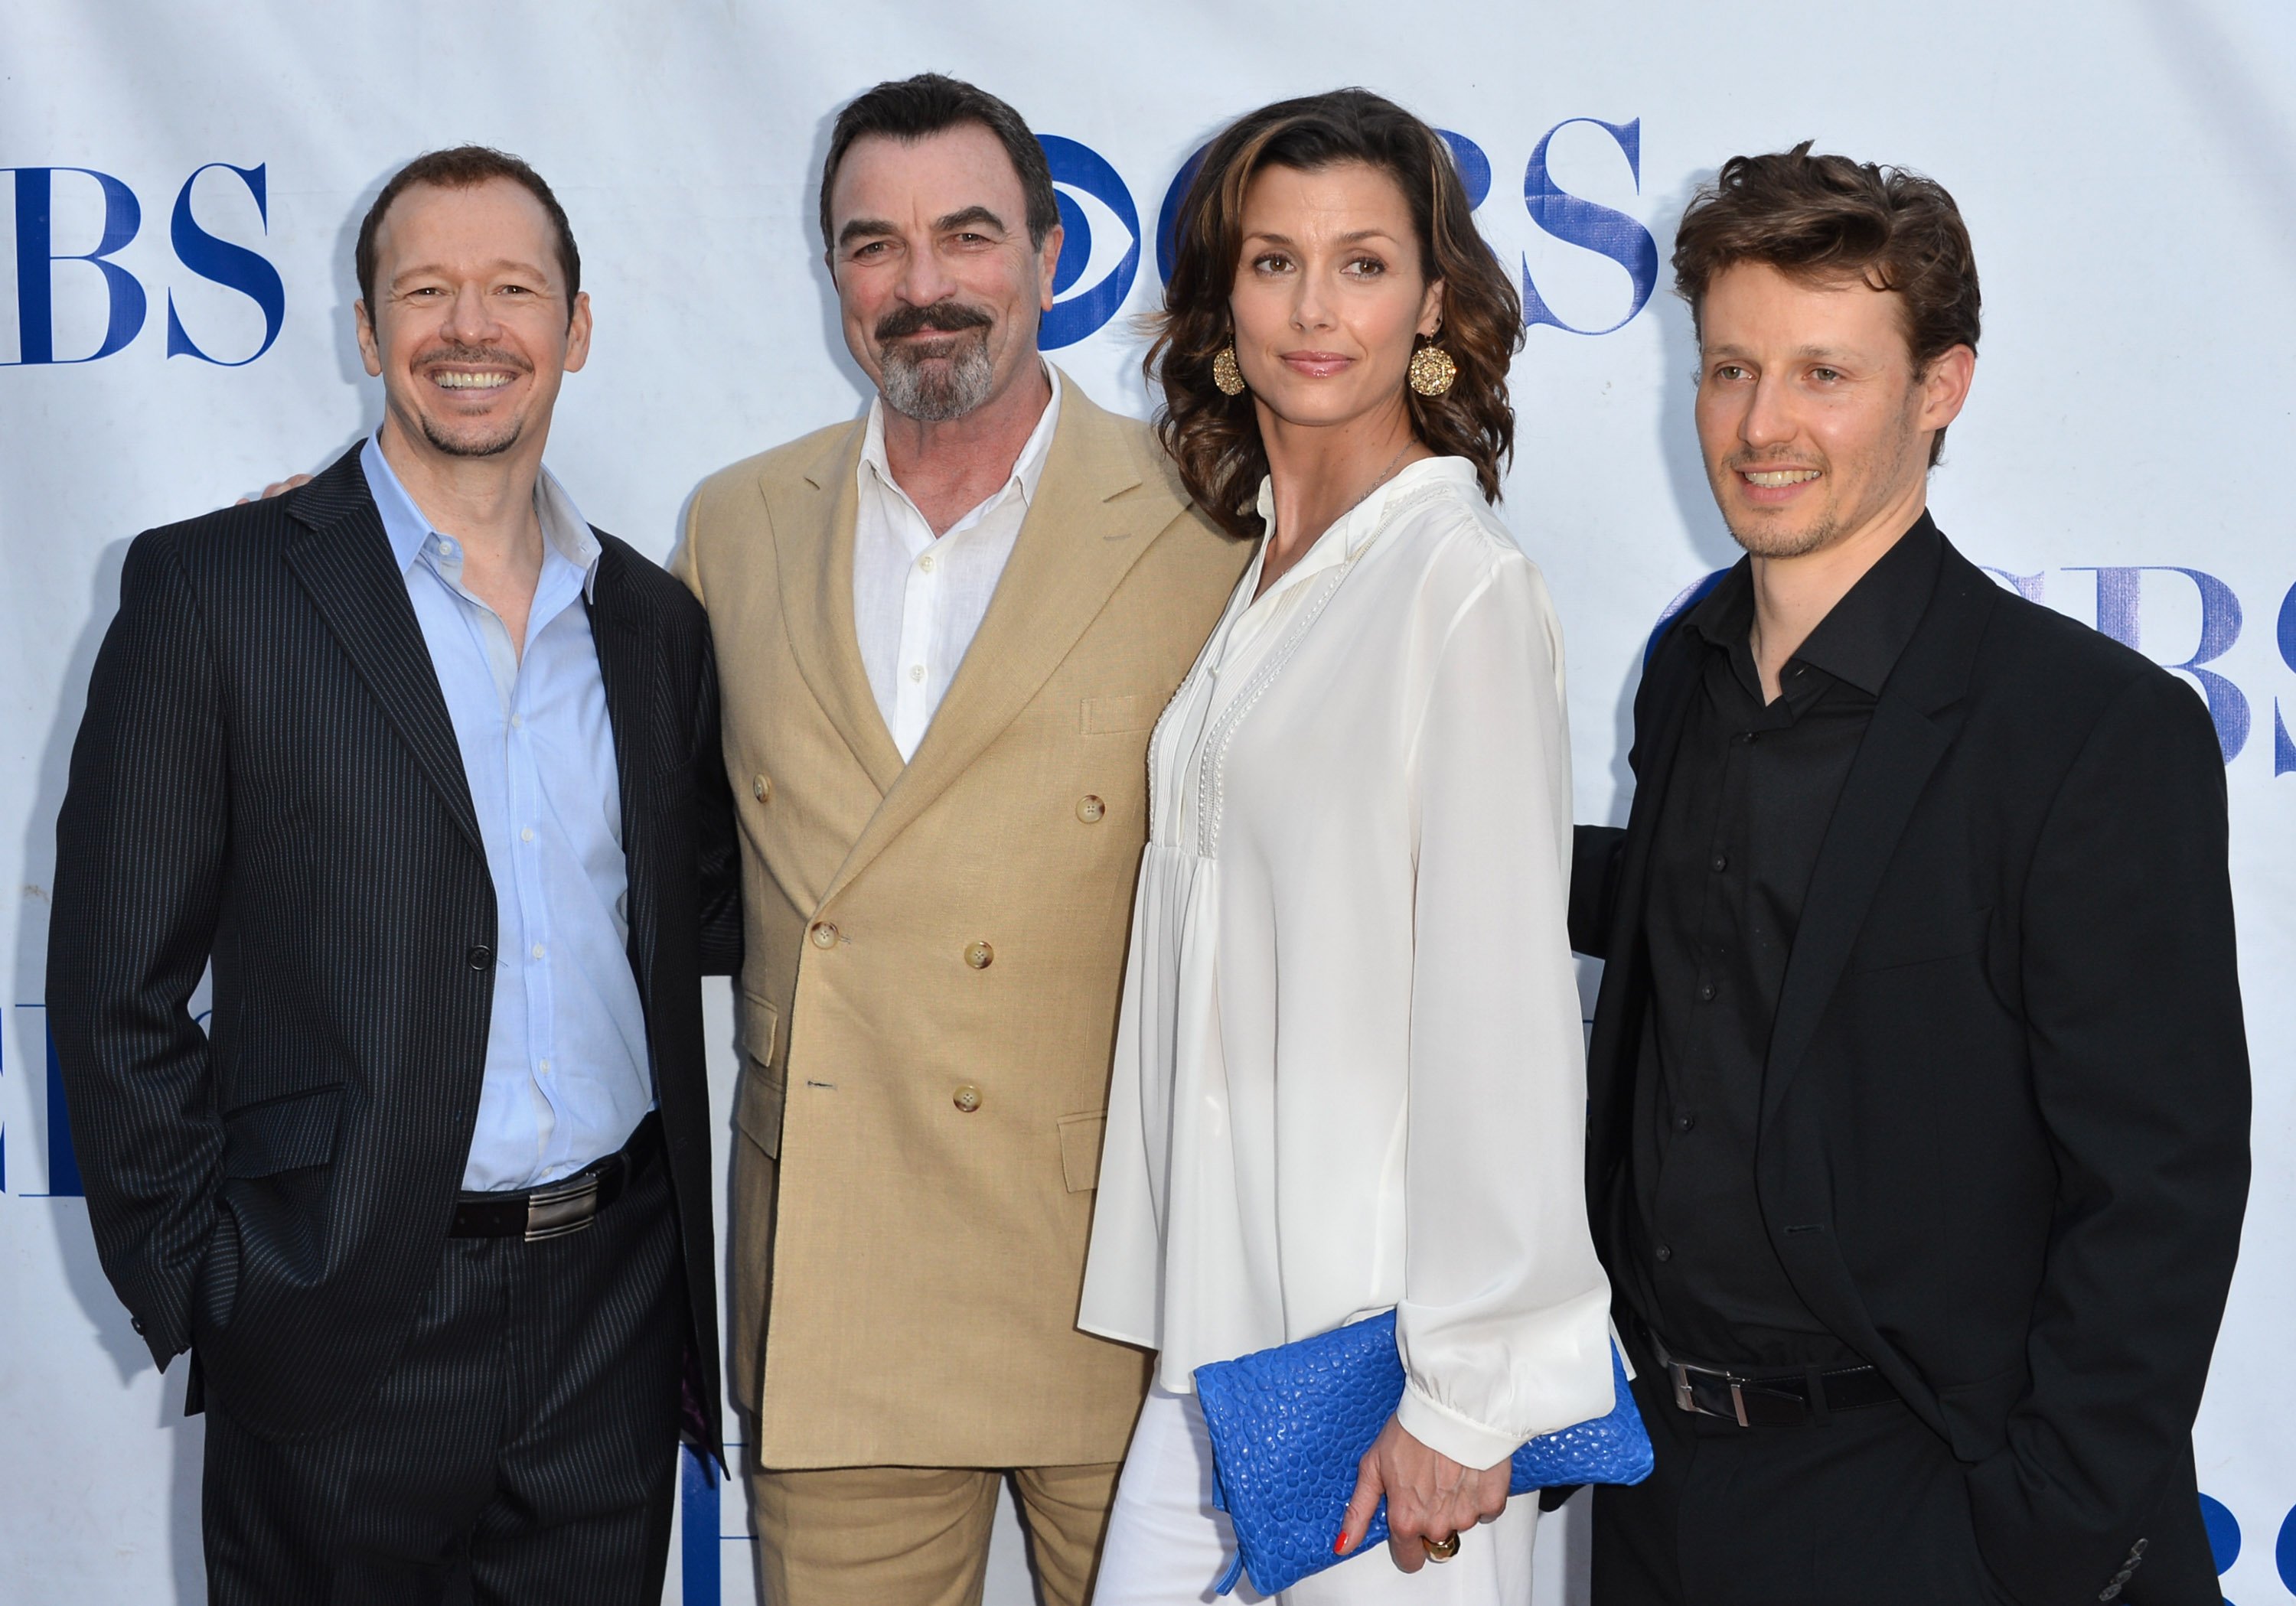 Donnie Wahlberg, Tom Selleck, Bridget Moynahan, Will Estes arrive to a screening and panel discussion of CBS's "Blue Bloods" on June 5, 2012 in North Hollywood, California | Photo: GettyImages